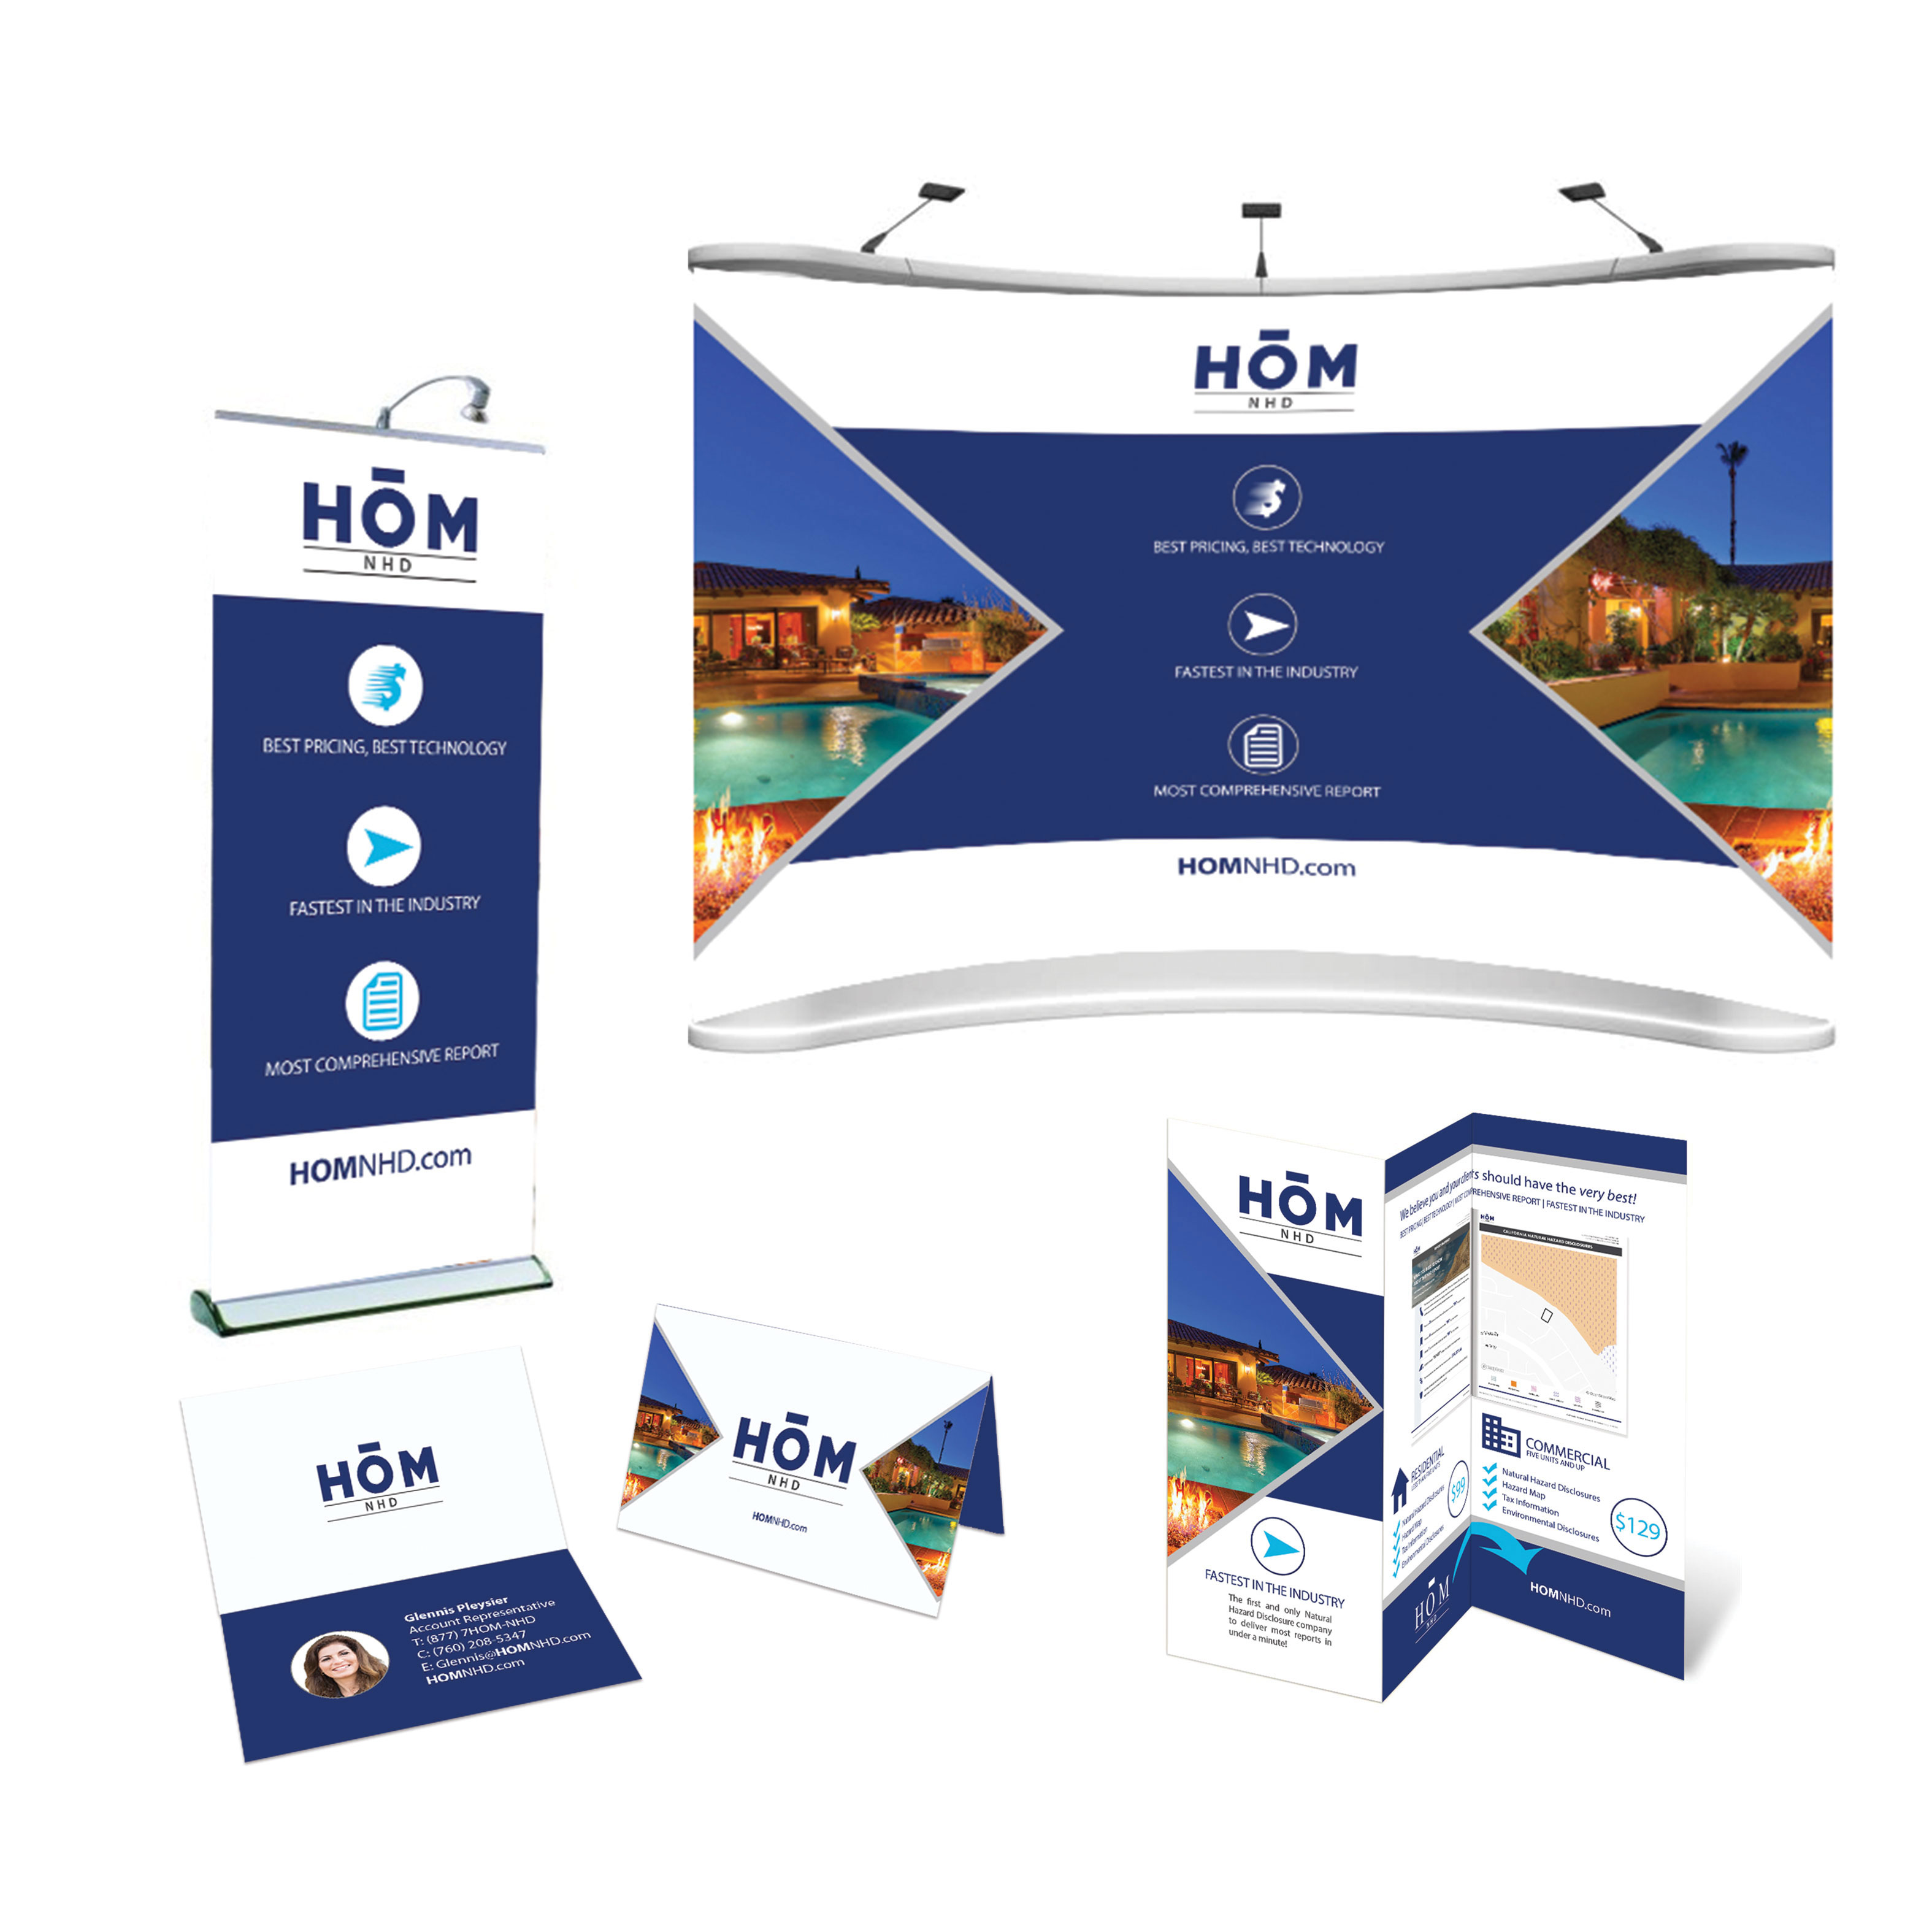 Branding elements created for HOM NHD which include creative design examples of a quick screen design, pop-up display design, tri-fold brochure design and folded business card design. Elements show a uniform brand throughout all collateral pieces.